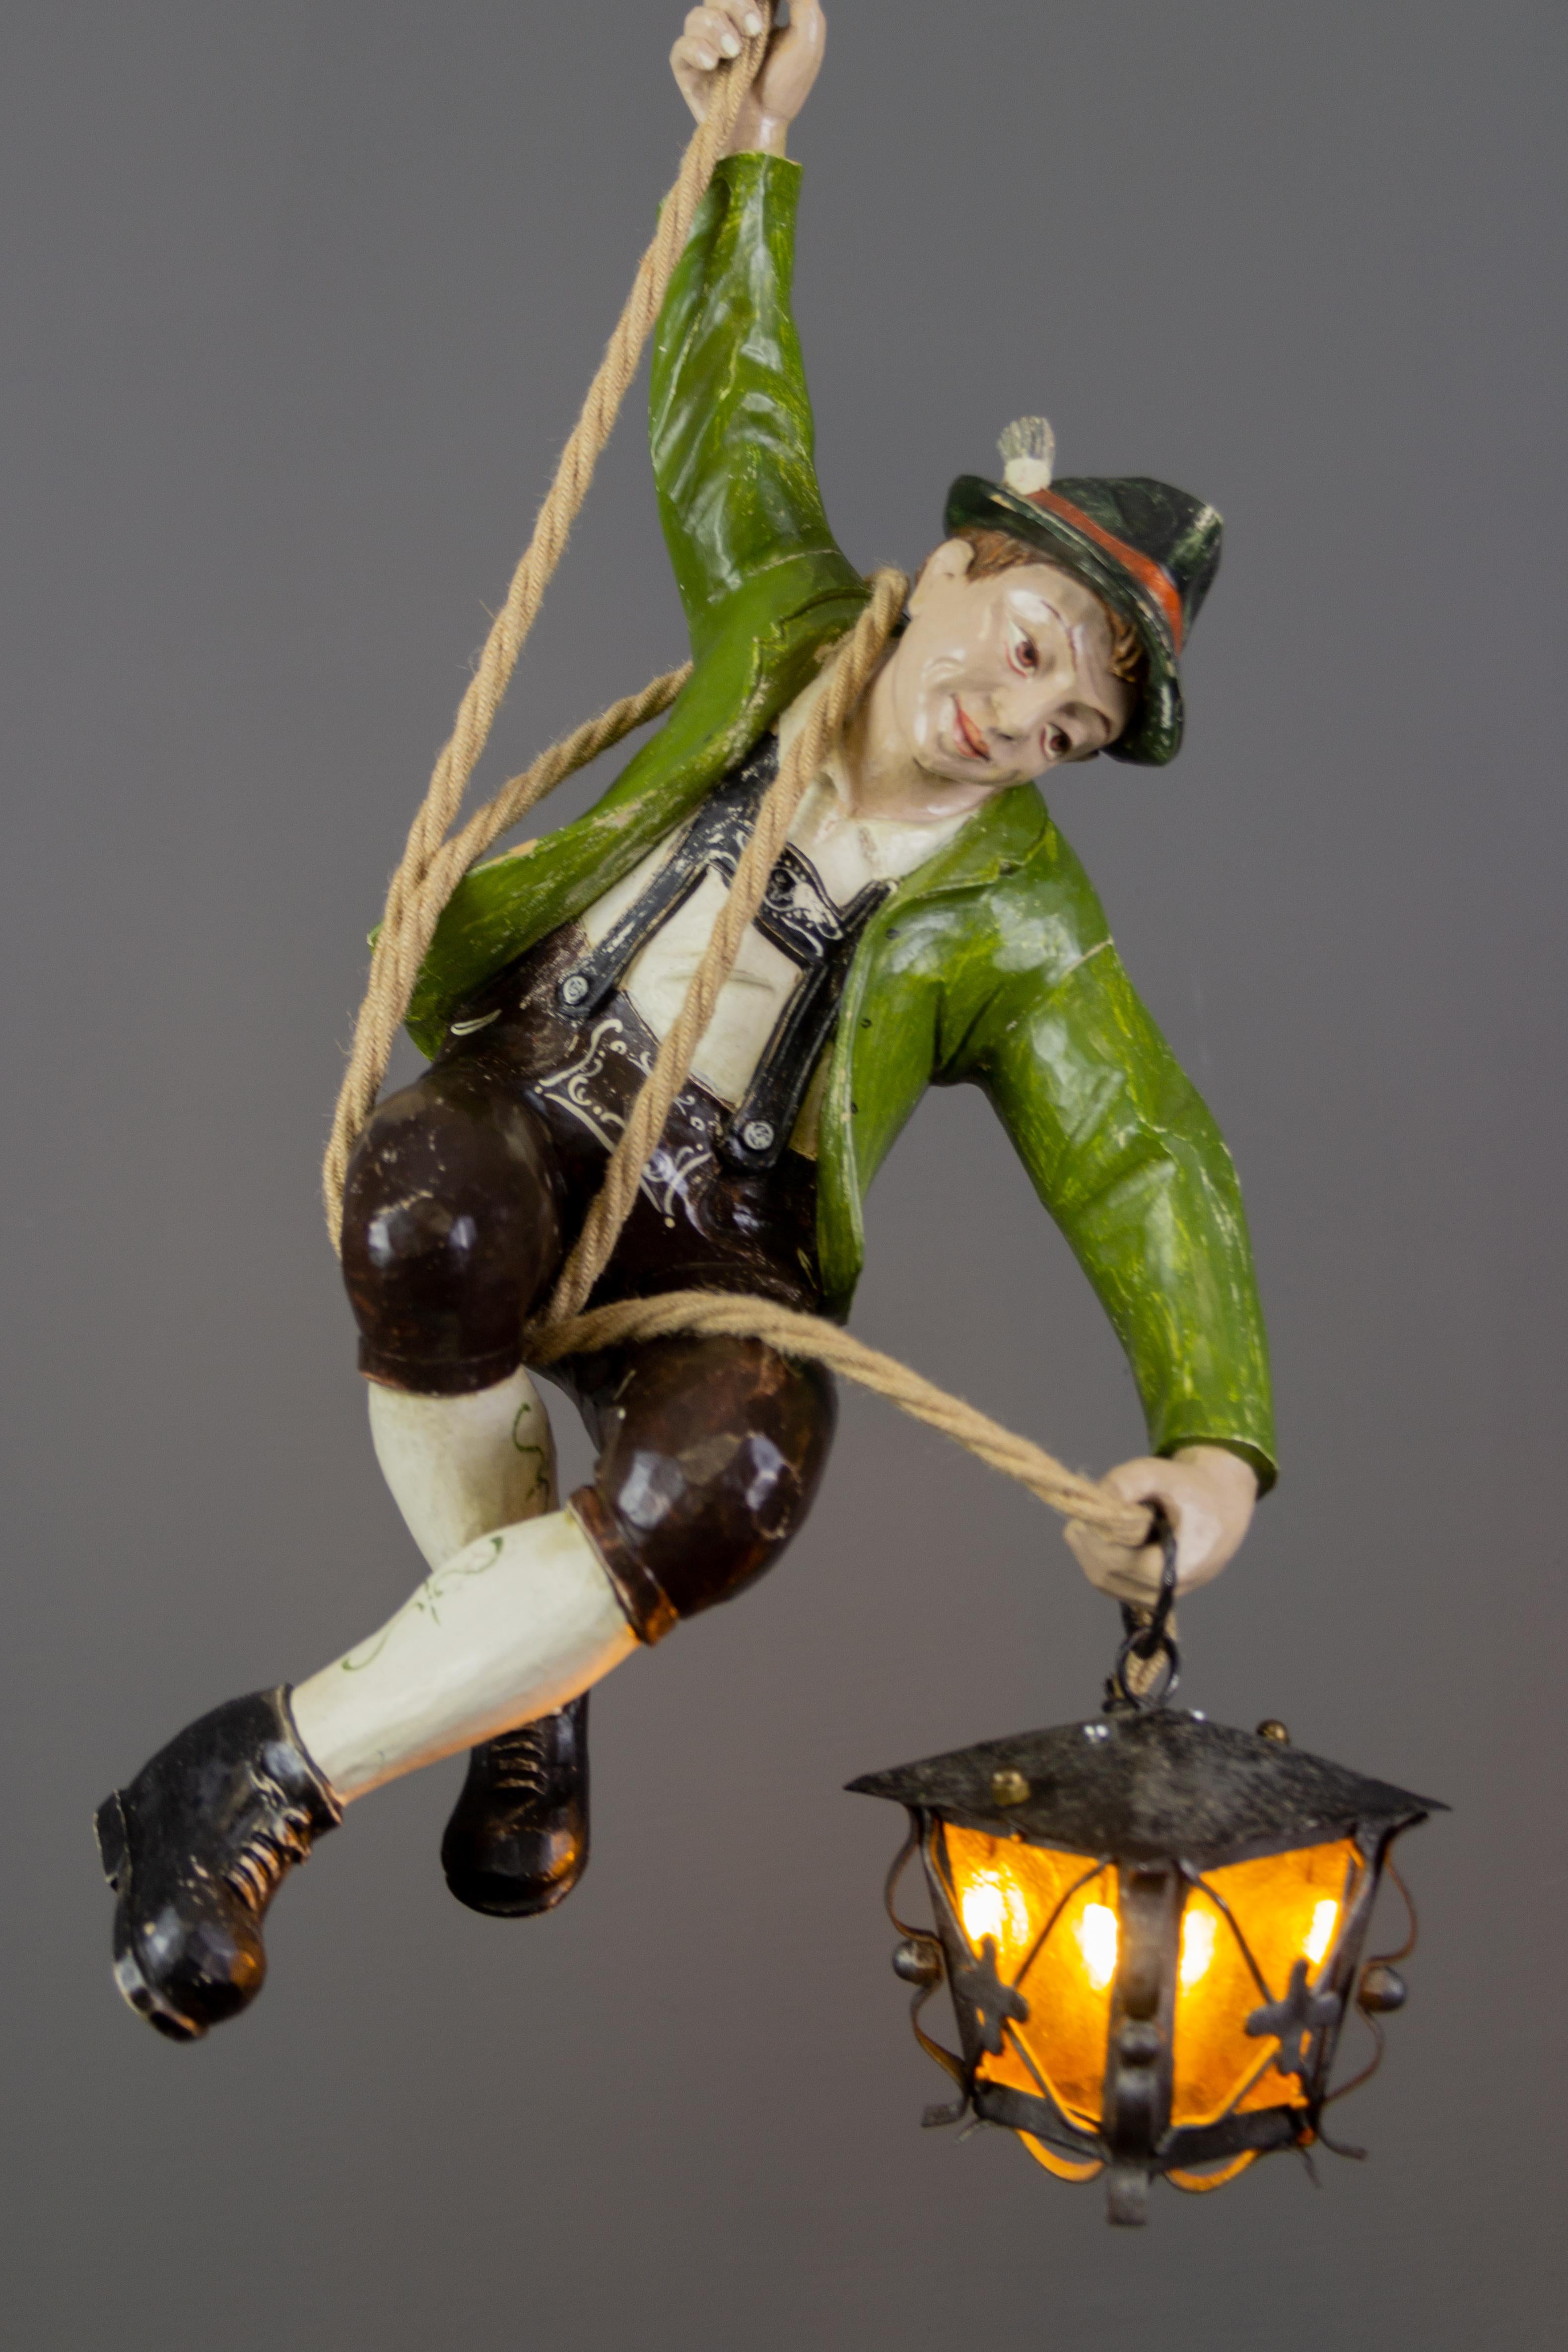 German Pendant Light with Carved Wooden Mountain Climber Figure and Lantern For Sale 13